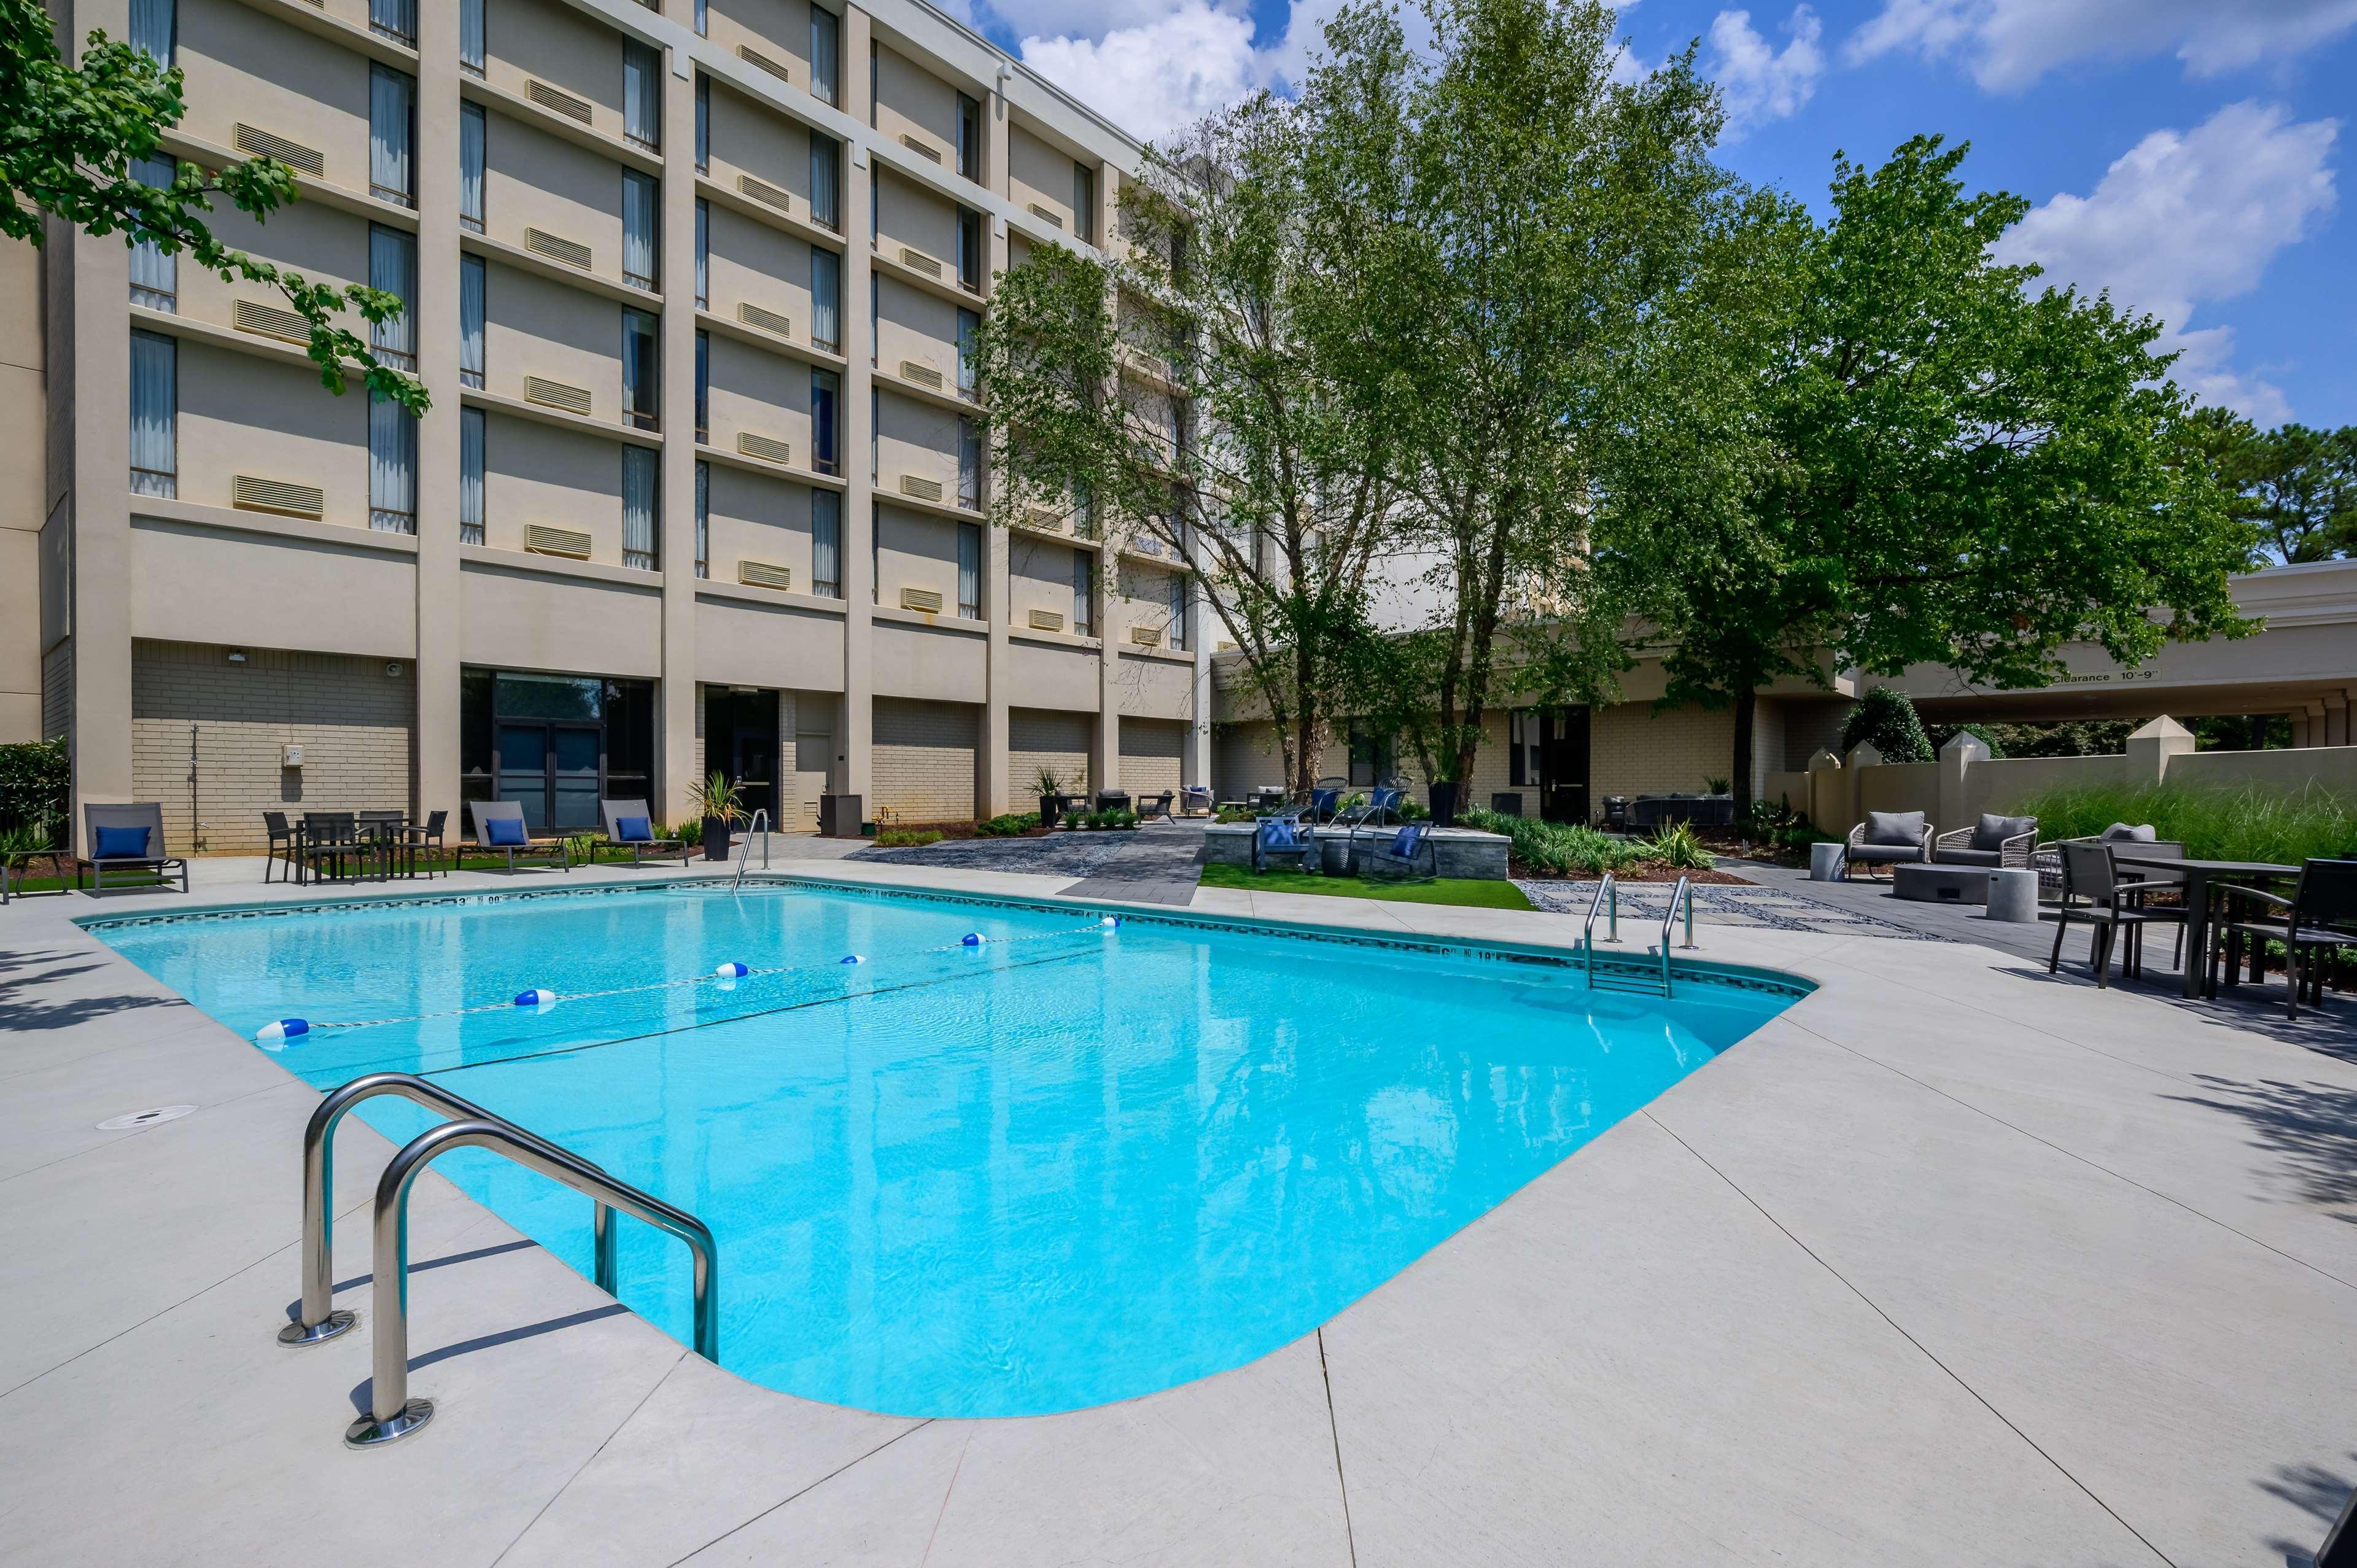 Doubletree By Hilton Raleigh Midtown, Nc Hotel Exterior photo